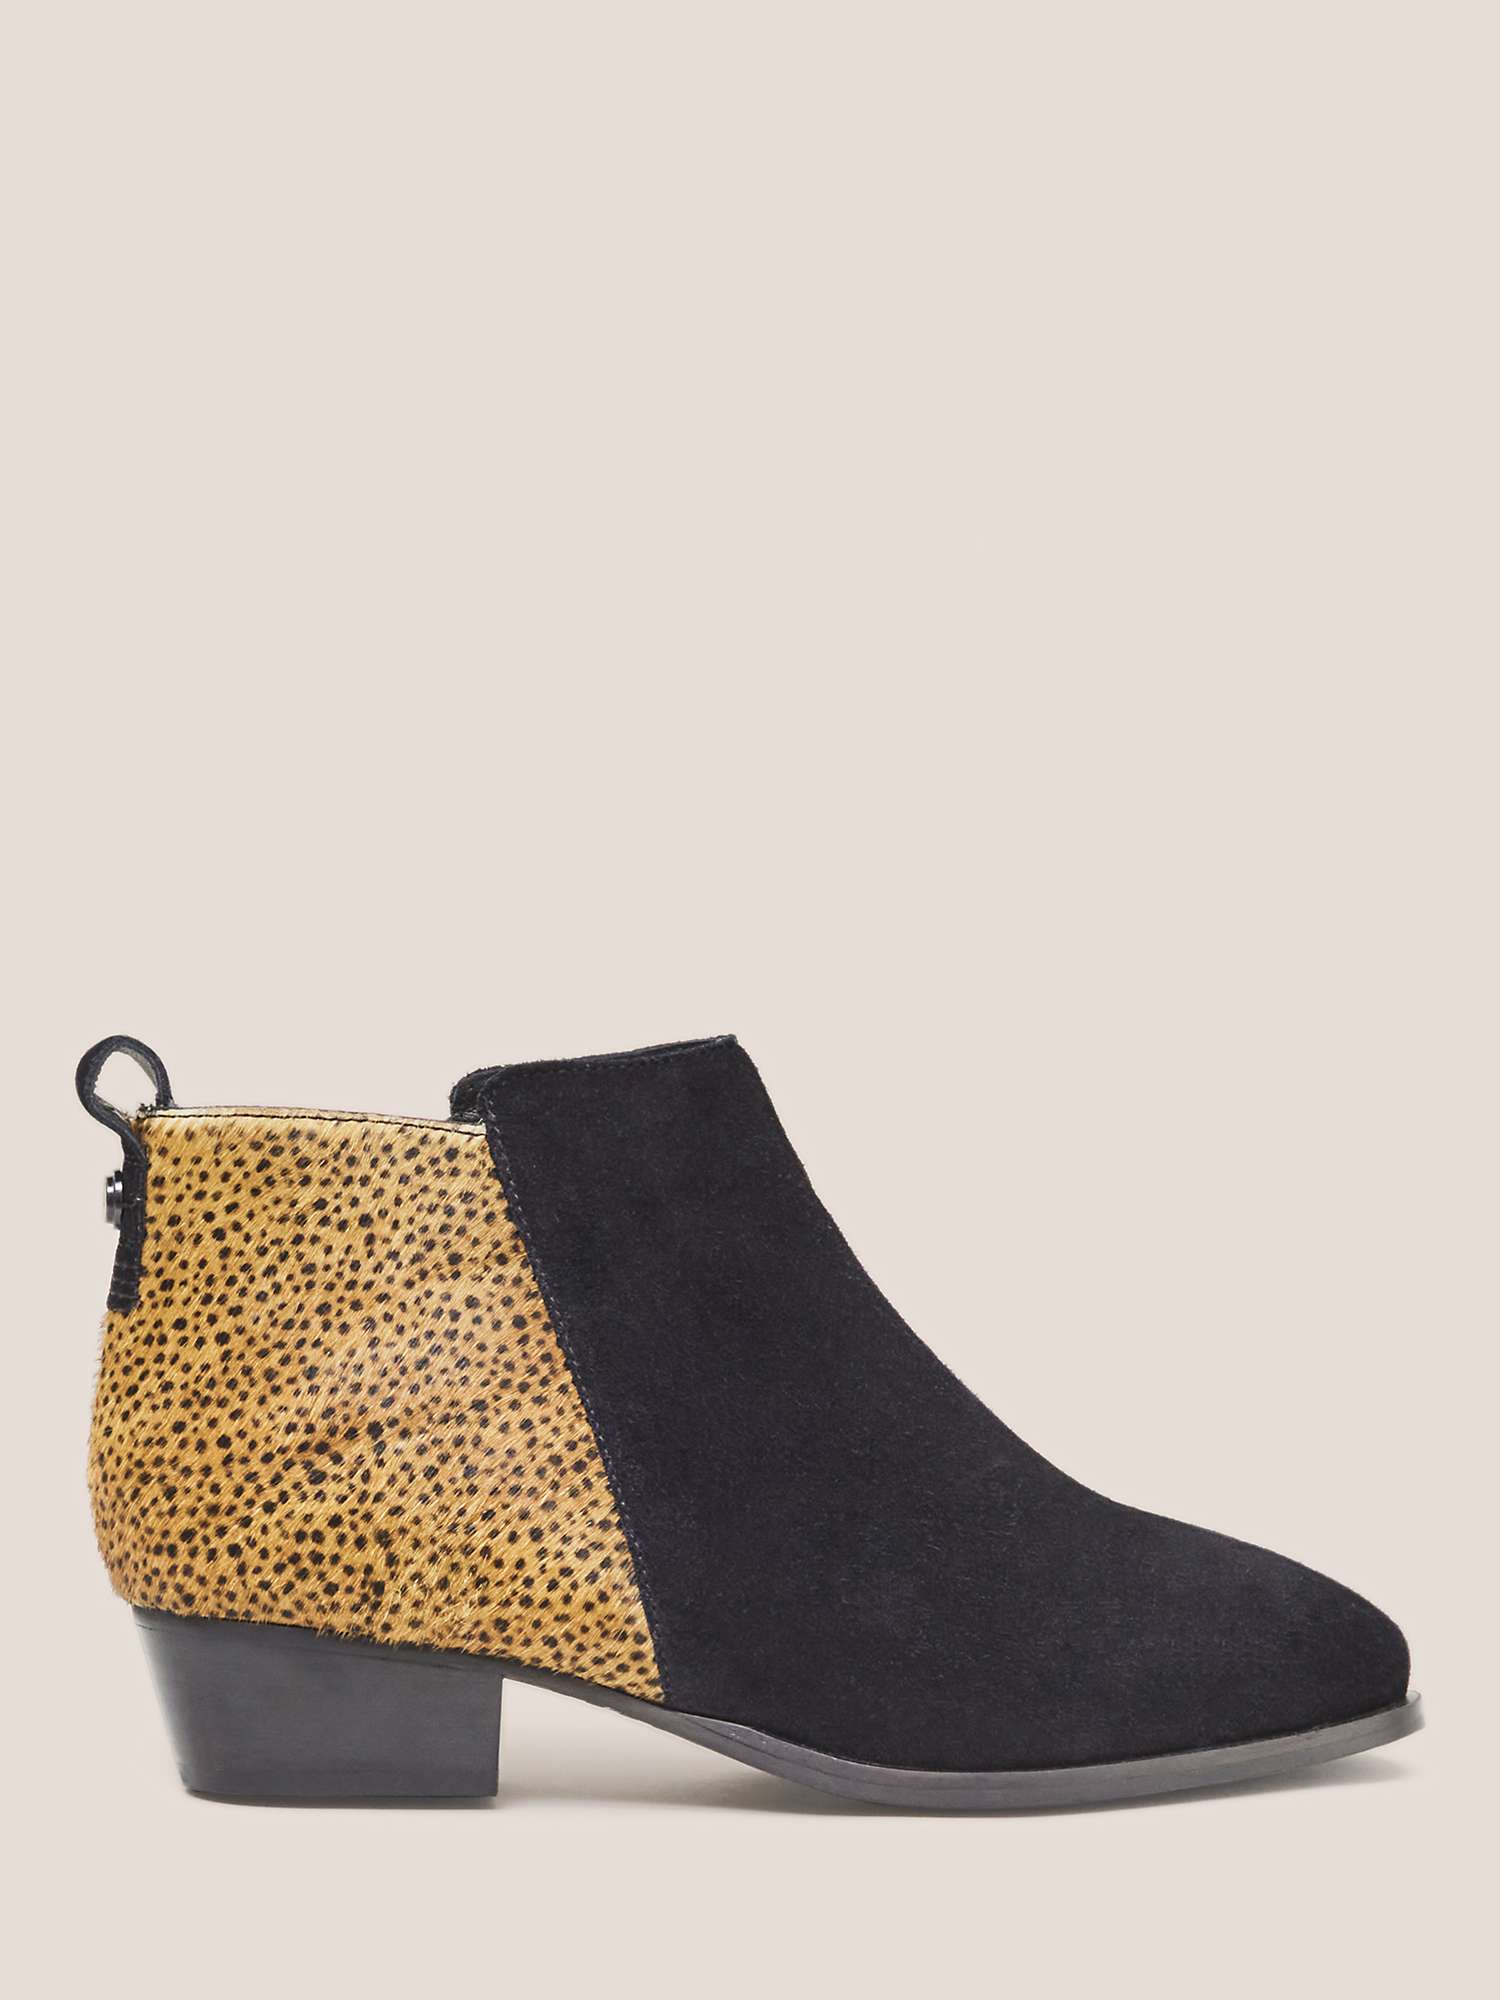 Buy White Stuff Willow Suede Shoe Boots Online at johnlewis.com